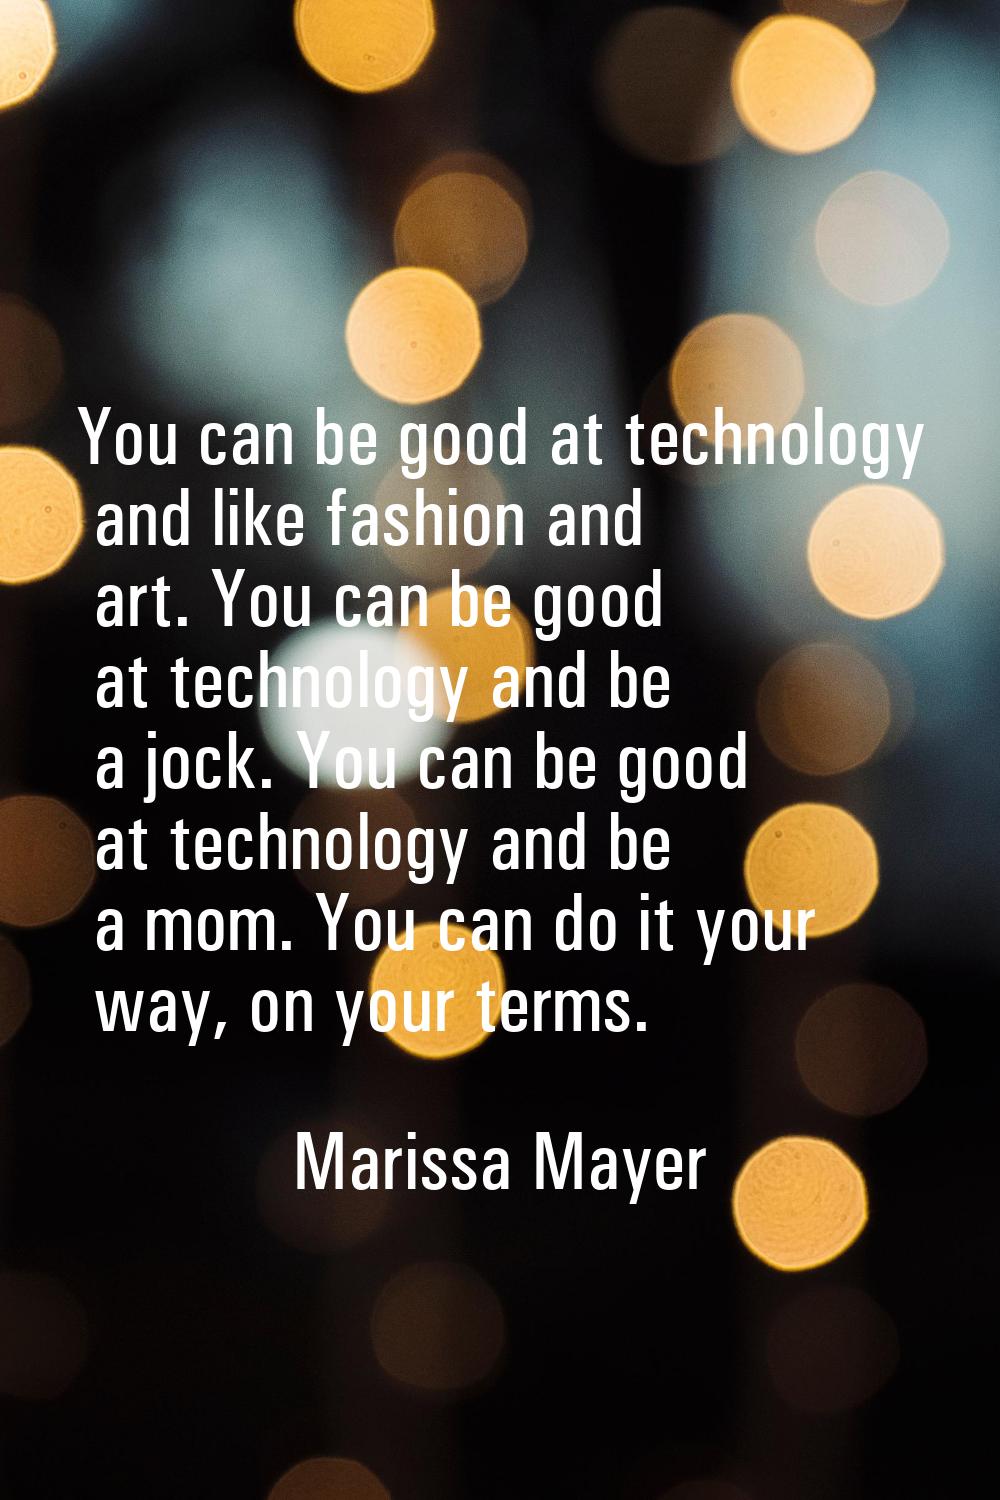 You can be good at technology and like fashion and art. You can be good at technology and be a jock